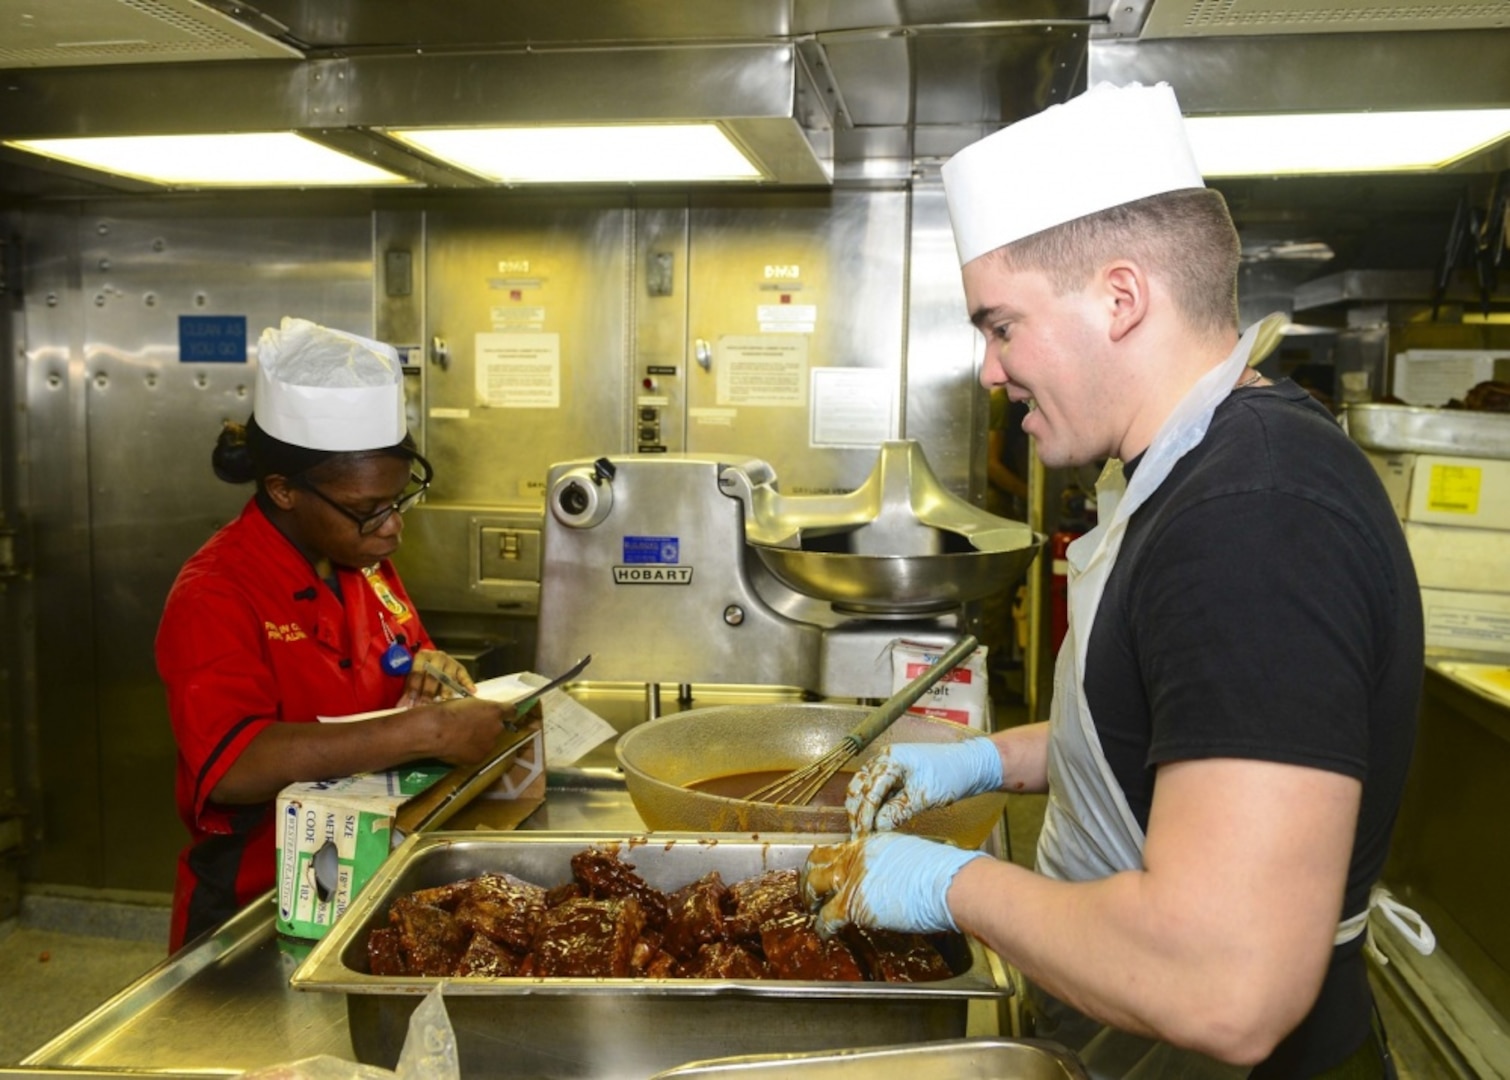 Marine Corps Cpl. Giovanni Perez, right, prepares barbecued ribs in the galley aboard the amphibious dock landing ship USS Whidbey Island, Nov. 14, 2016. Navy photo by Petty Officer 2nd Class Nathan R. McDonald